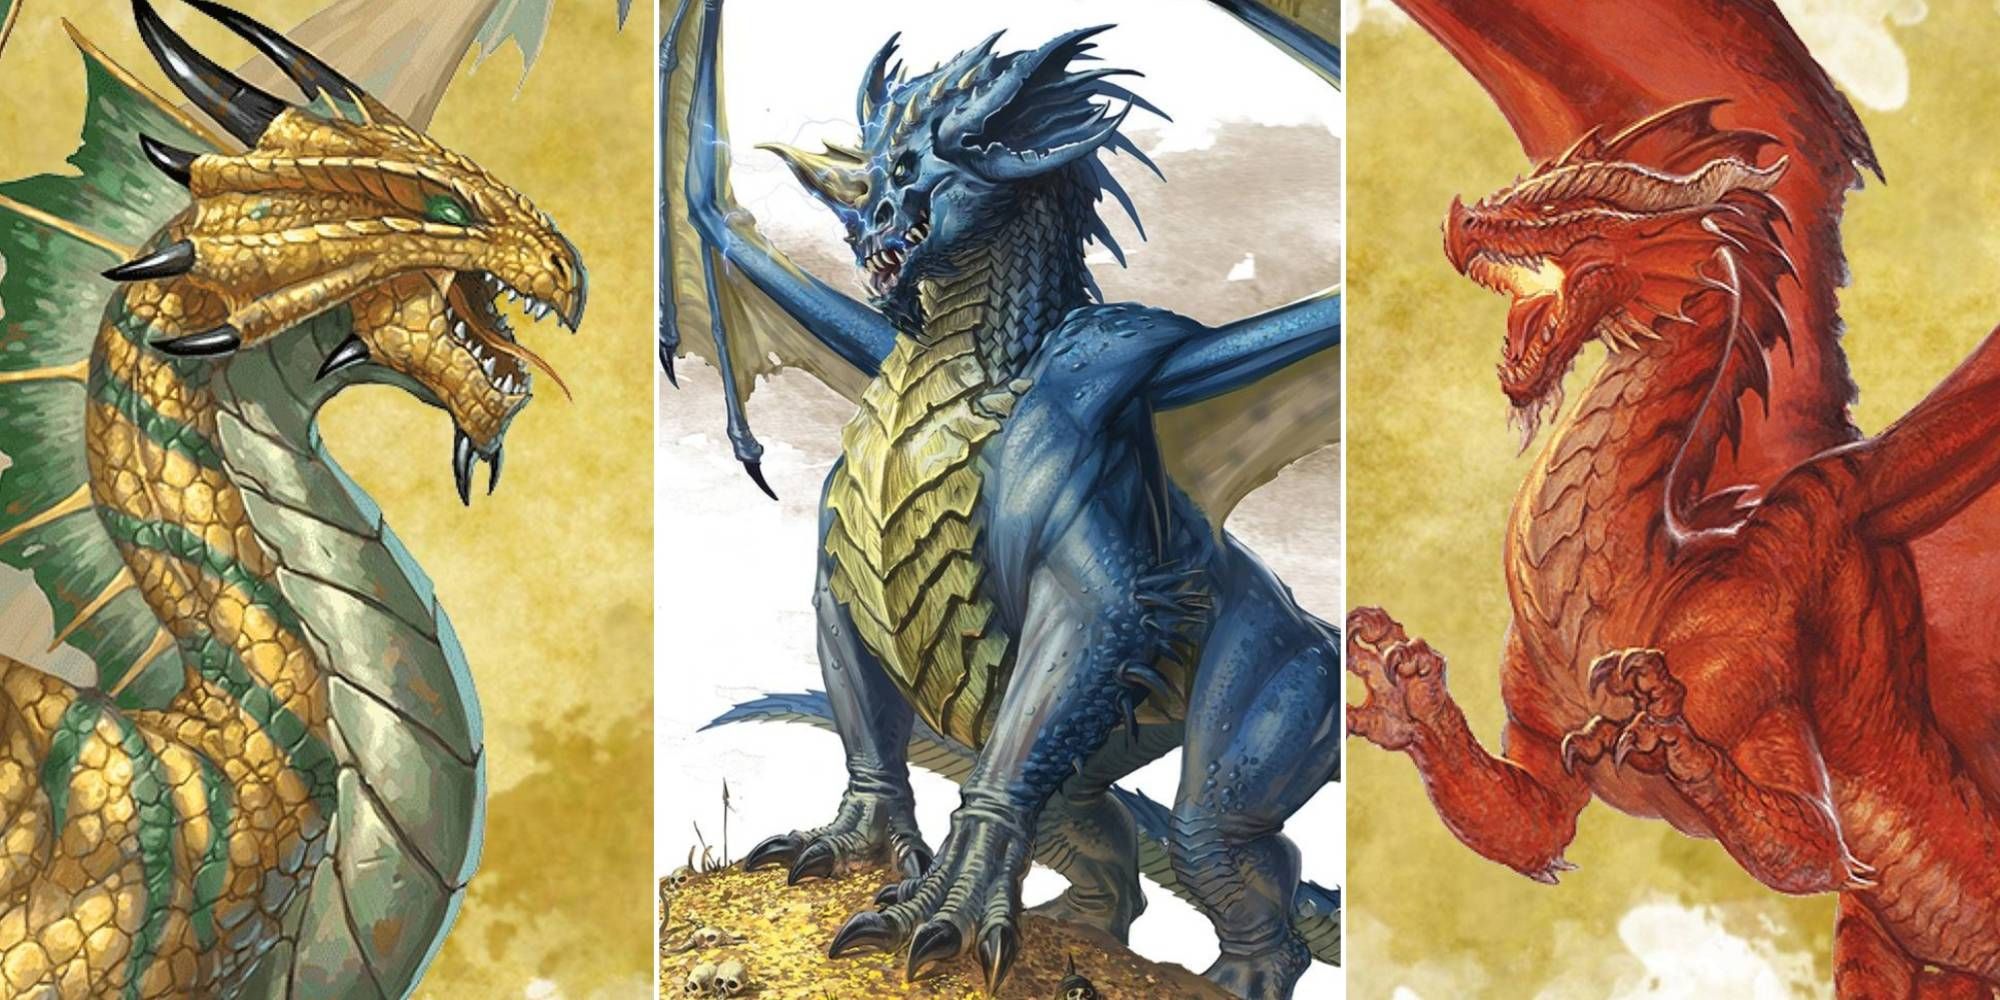 A collage of images featuring a brass dragon, blue dragon and red dragon from Dungeons & Dragons.